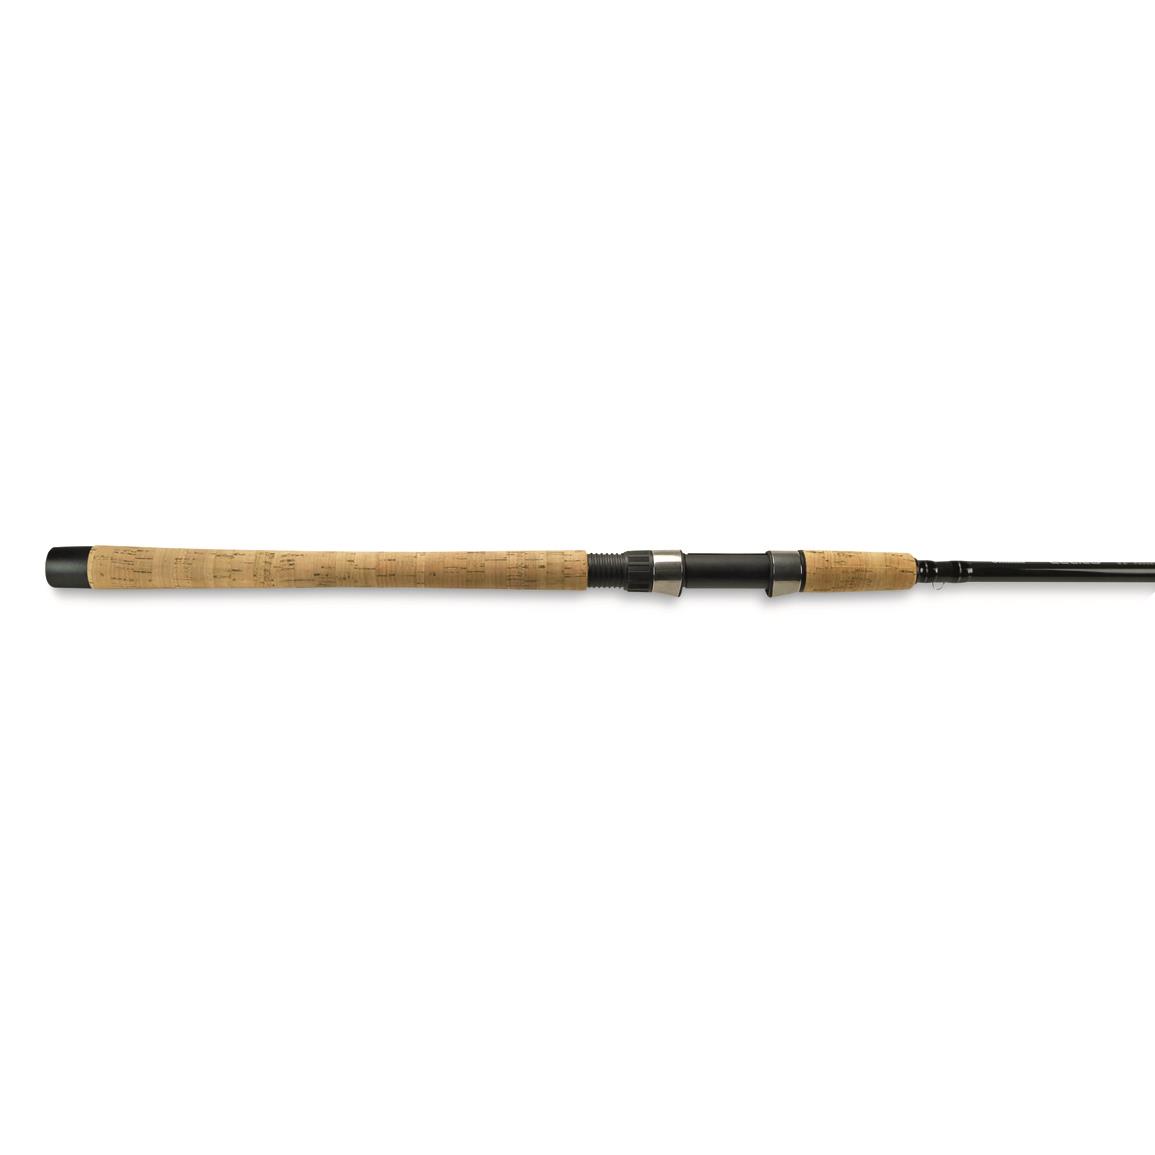 Fenwick Eagle® Trout & Panfish Spinning Rods - 737484, Spinning